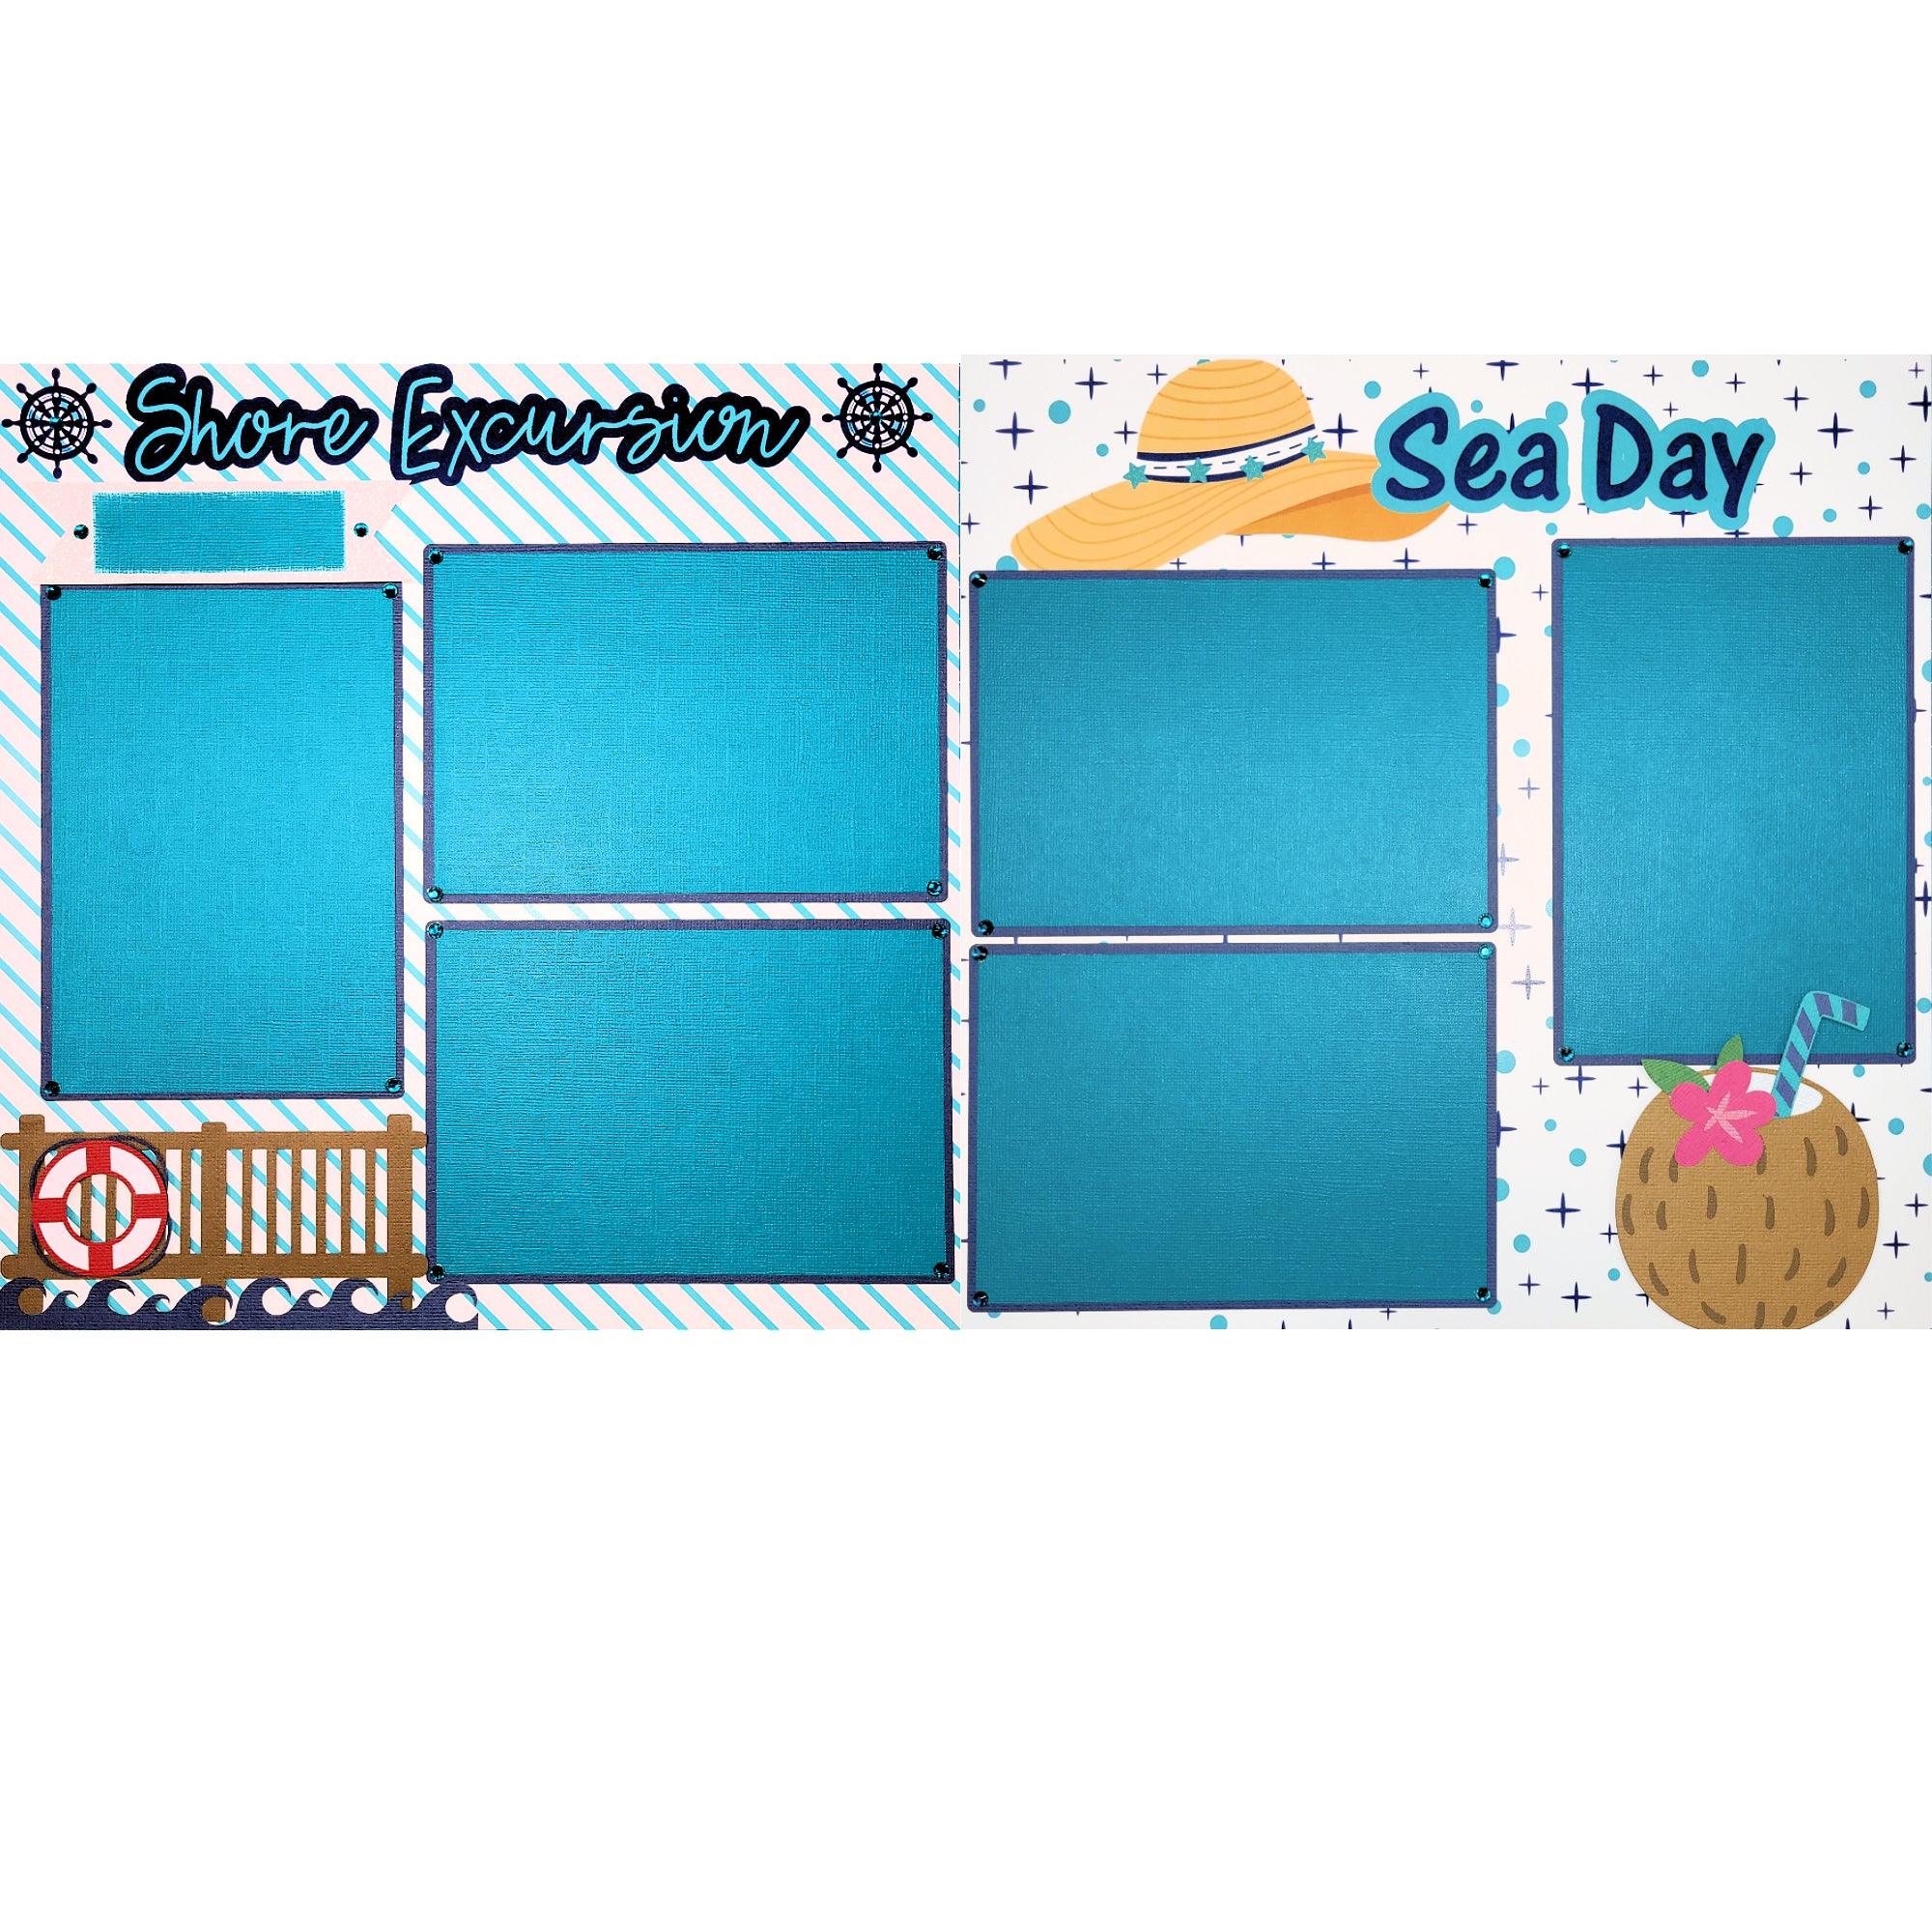 Cruise Collection 2 - 12 x 12 Pages, Fully-Assembled & Hand-Embellished 3D Scrapbook Premade by SSC Designs